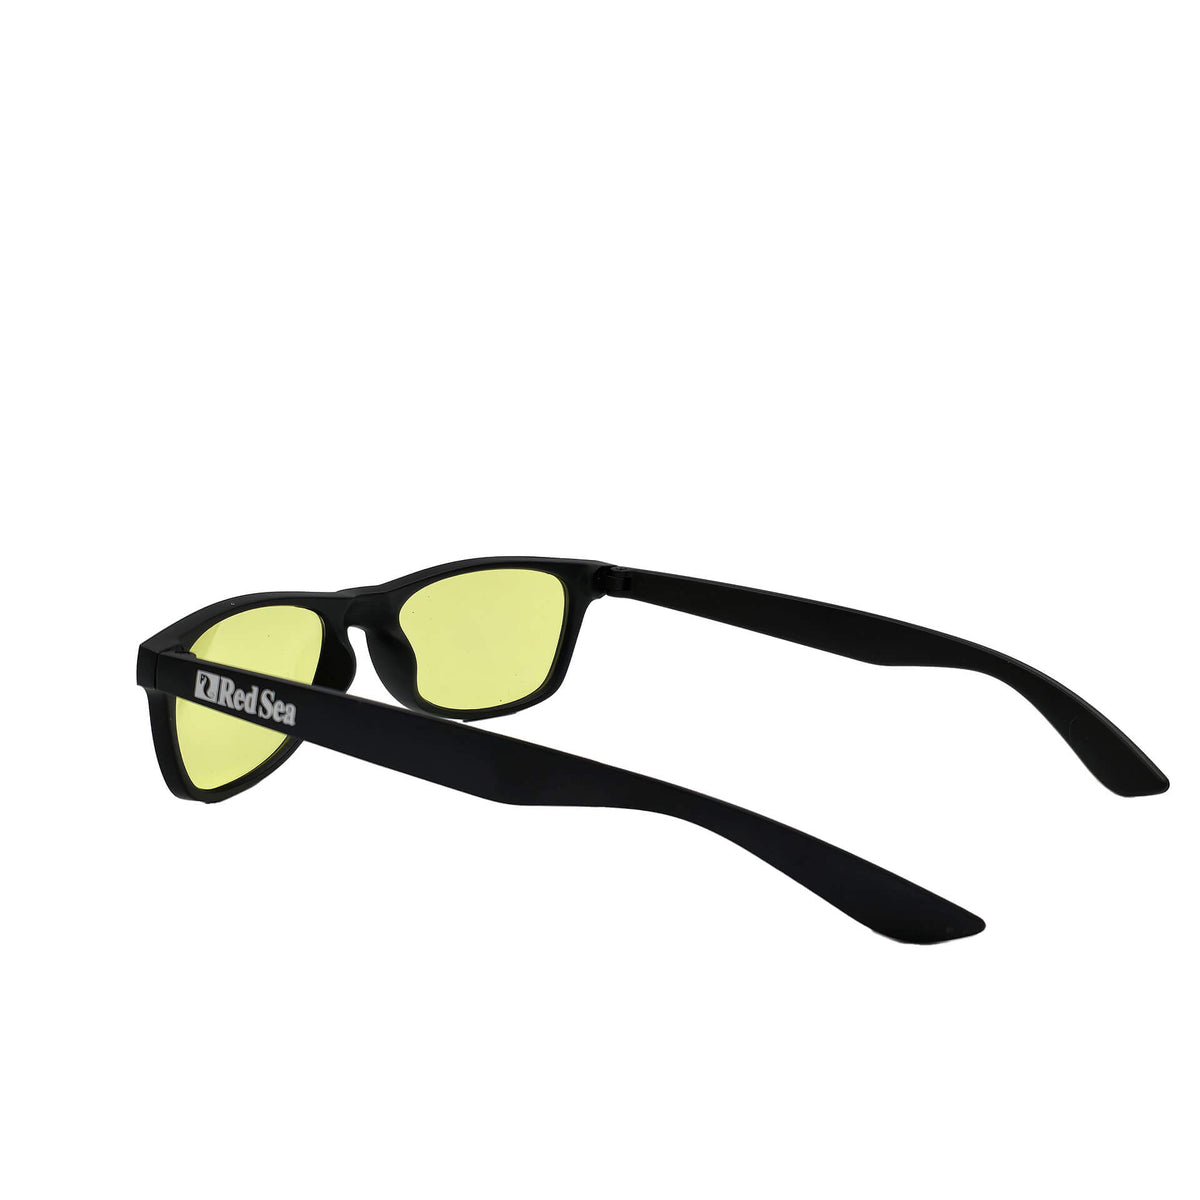 Red Sea ReefView Glasses